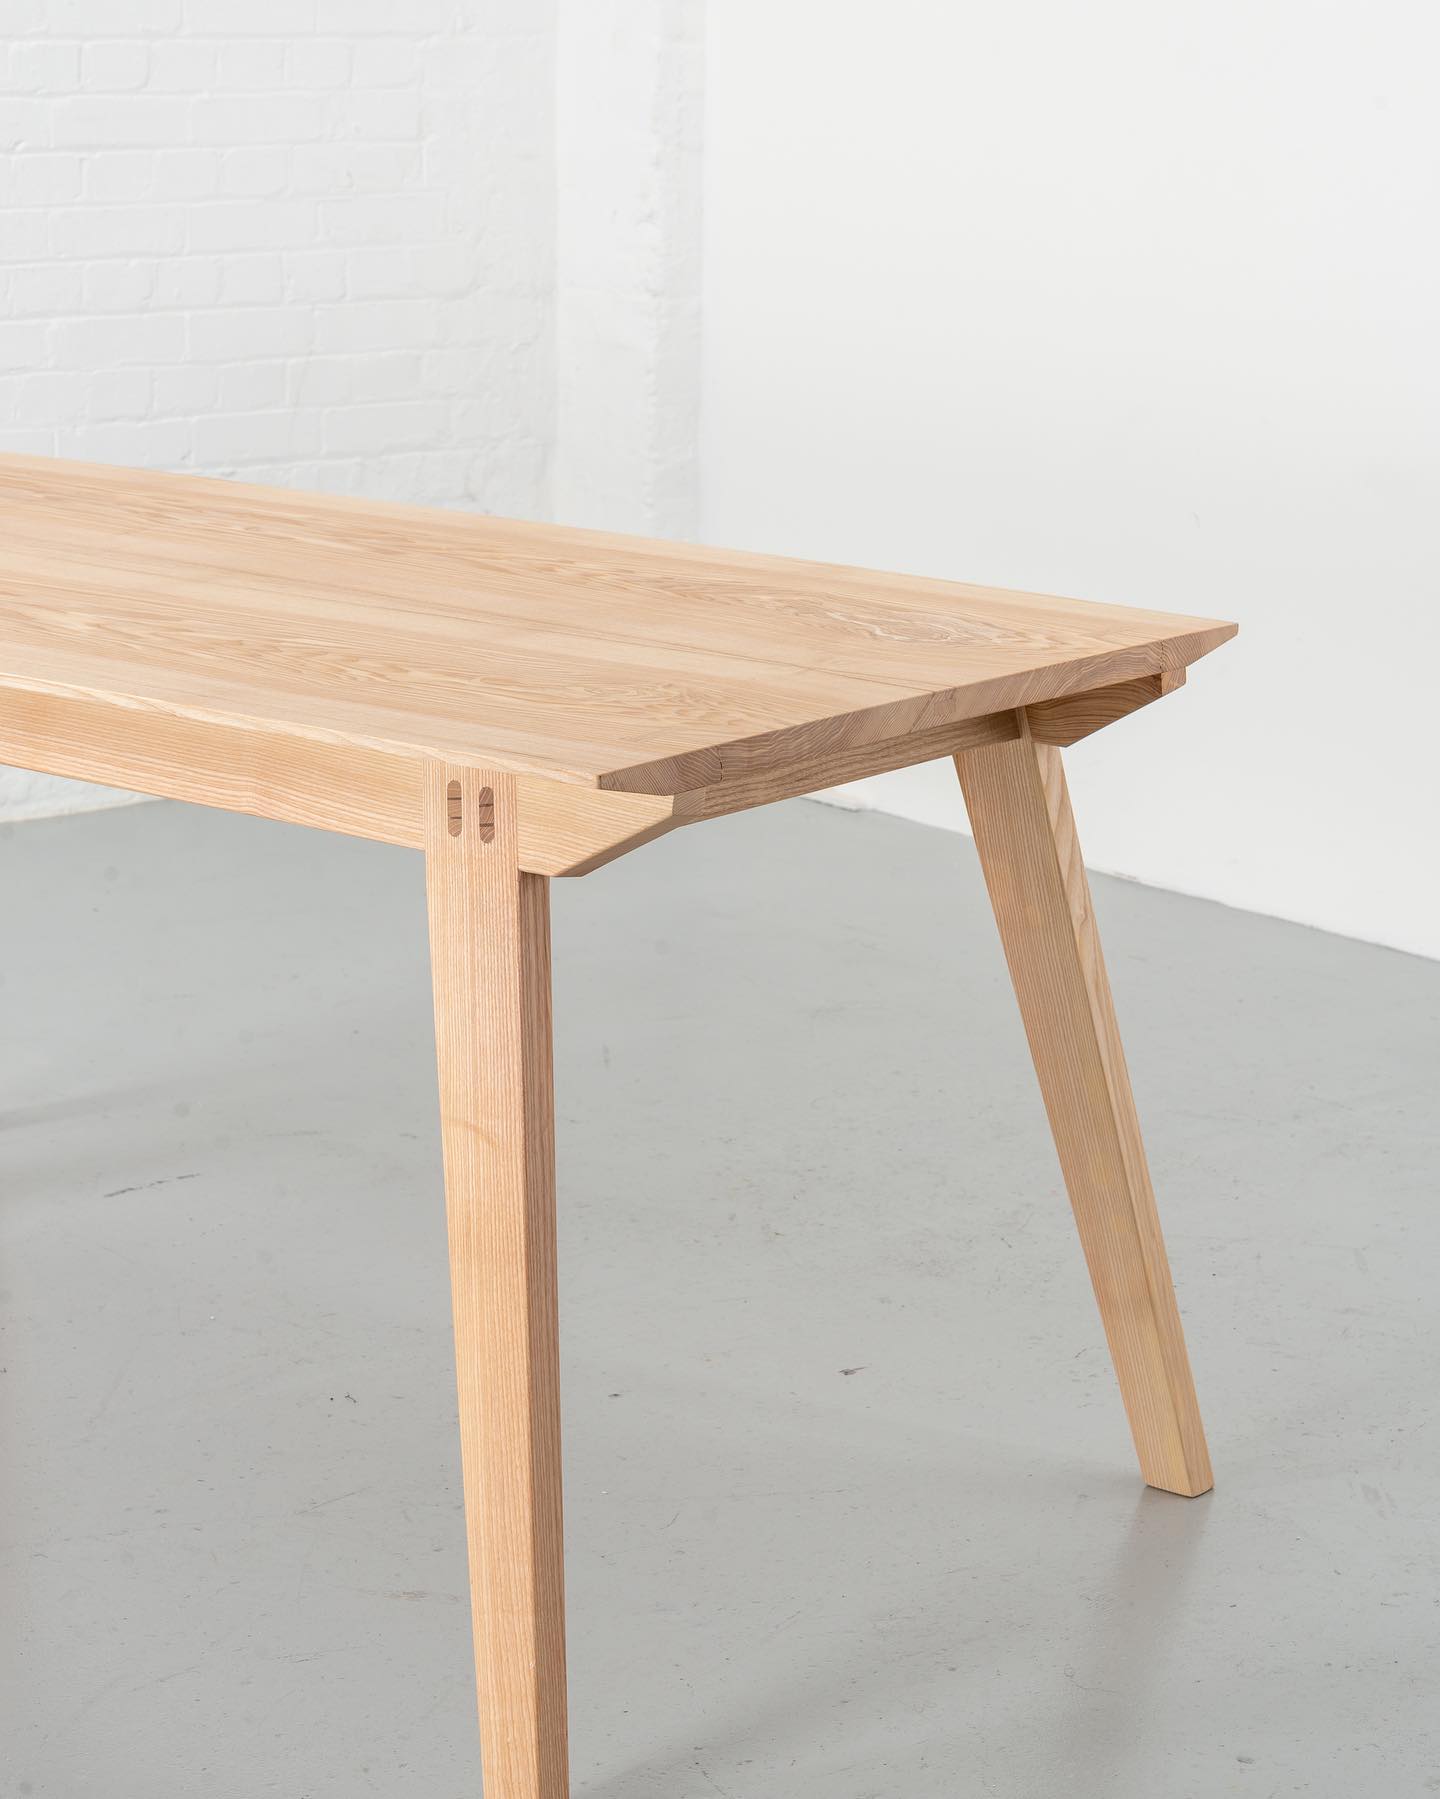 a-little-olive-ash-table-action.-its-always-good-to-revisit-previous-designs-it-gives-us-great-insig-1